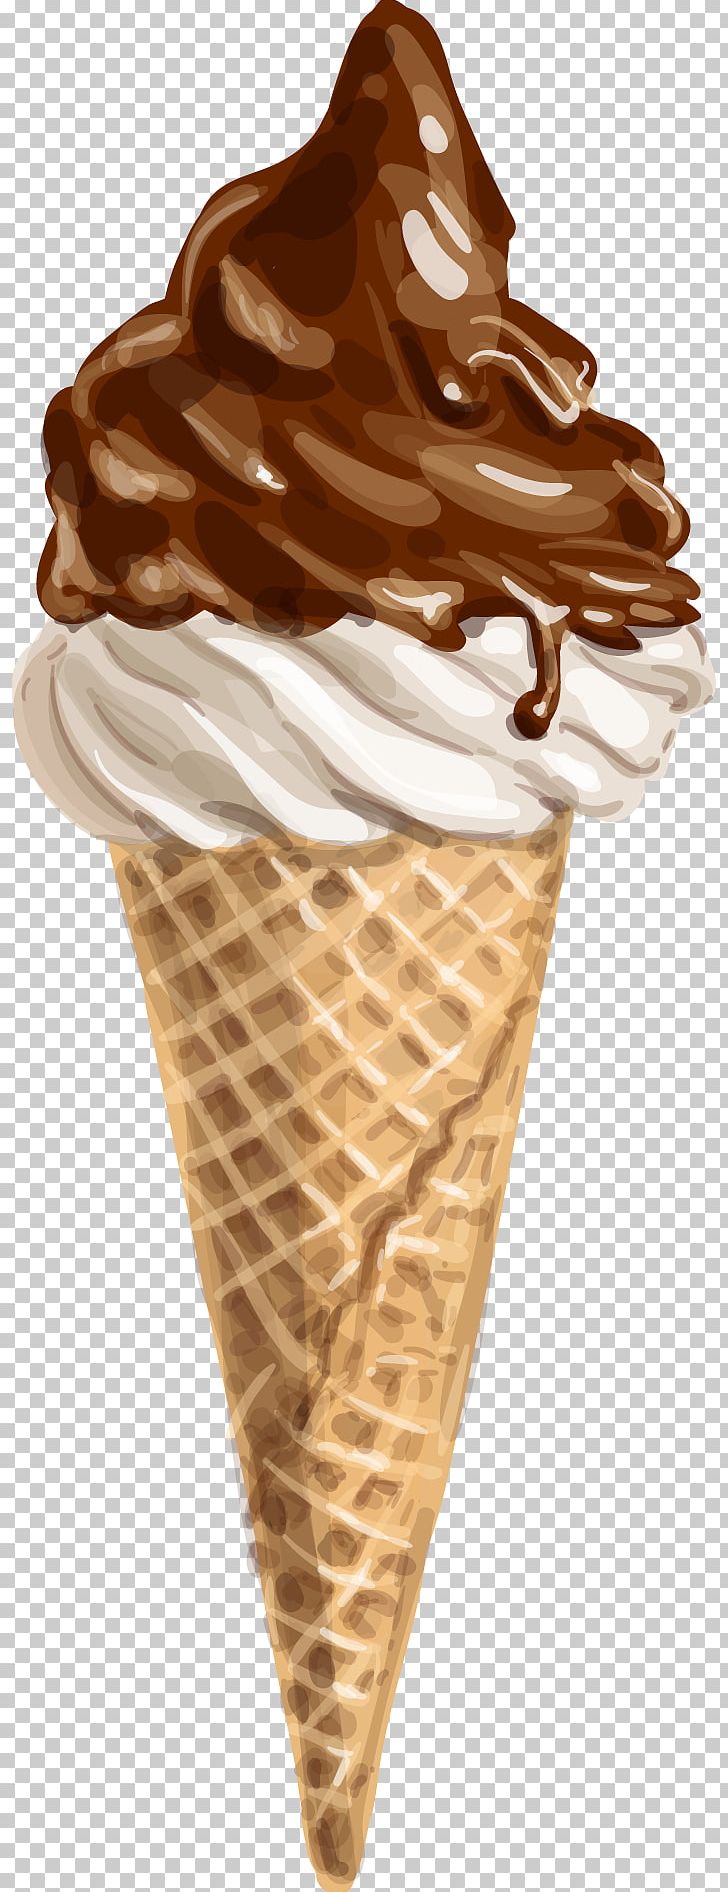 Ice Cream Cone Chocolate Ice Cream PNG, Clipart, Animation, Cake, Chocolate, Chocolate, Cream Free PNG Download